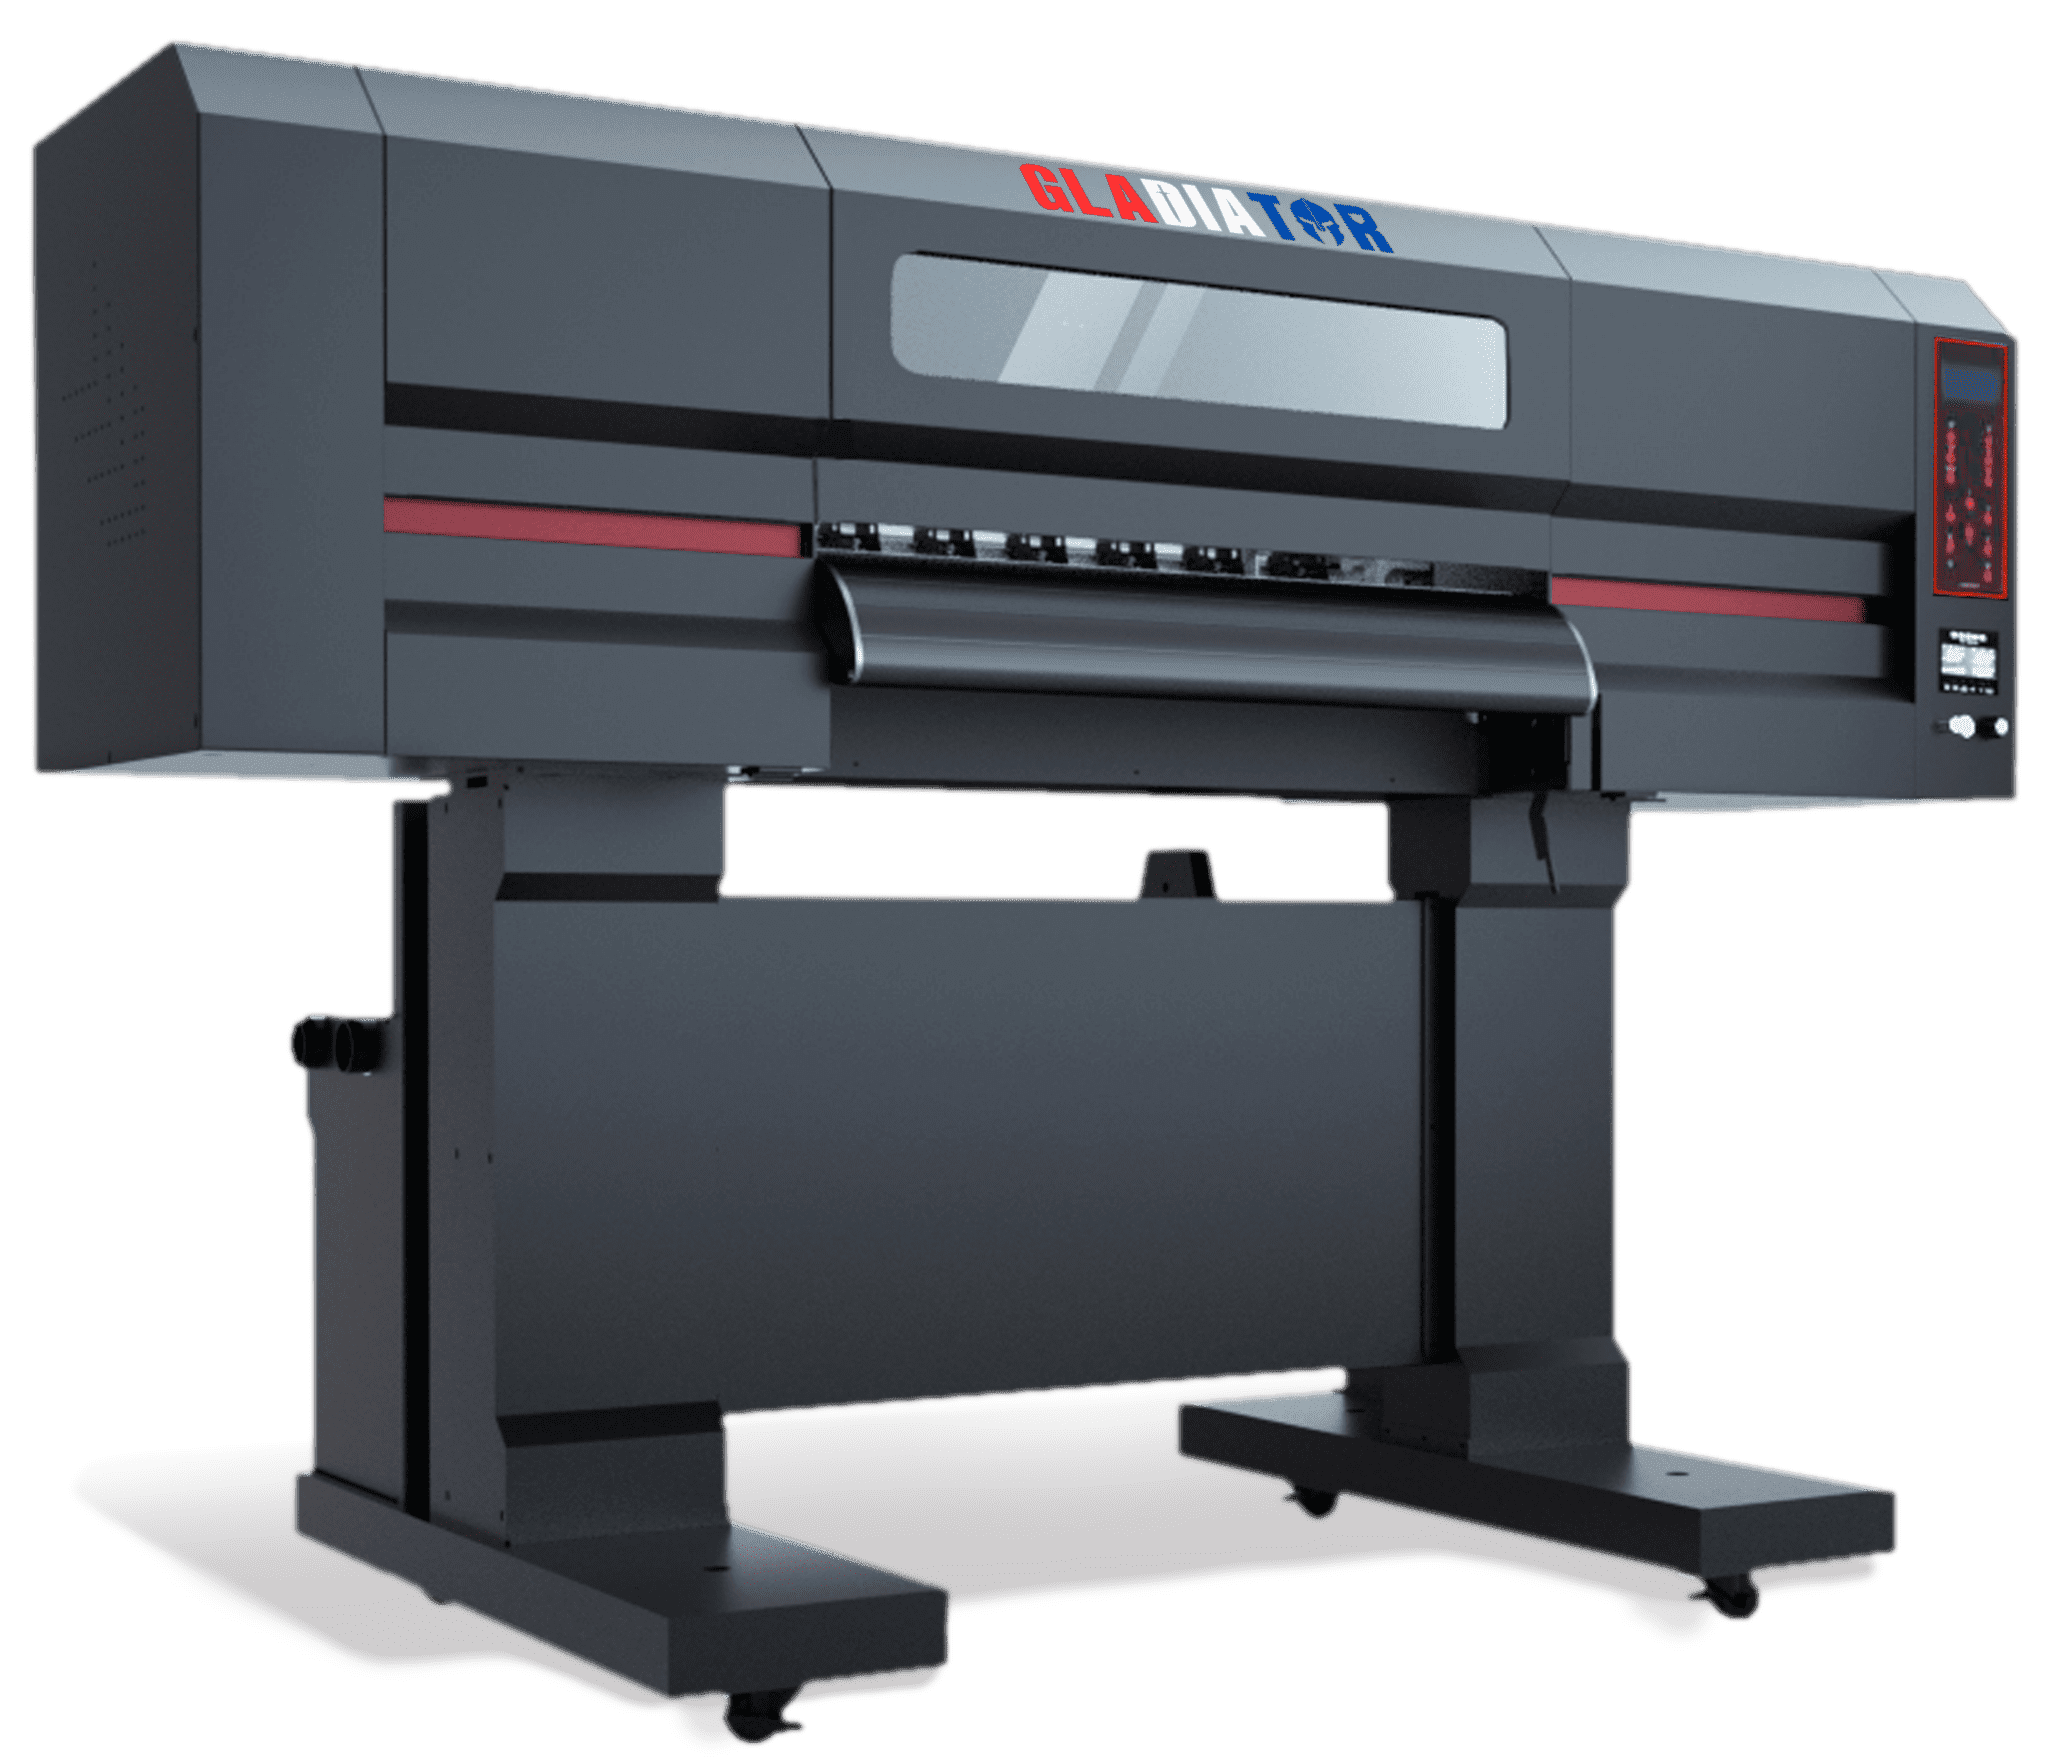 The Gladiator Four-Head Direct-to-Film Printer stands as the epitome of speed and durability, setting the industry standard as the fastest and most robust printing solution on the market.